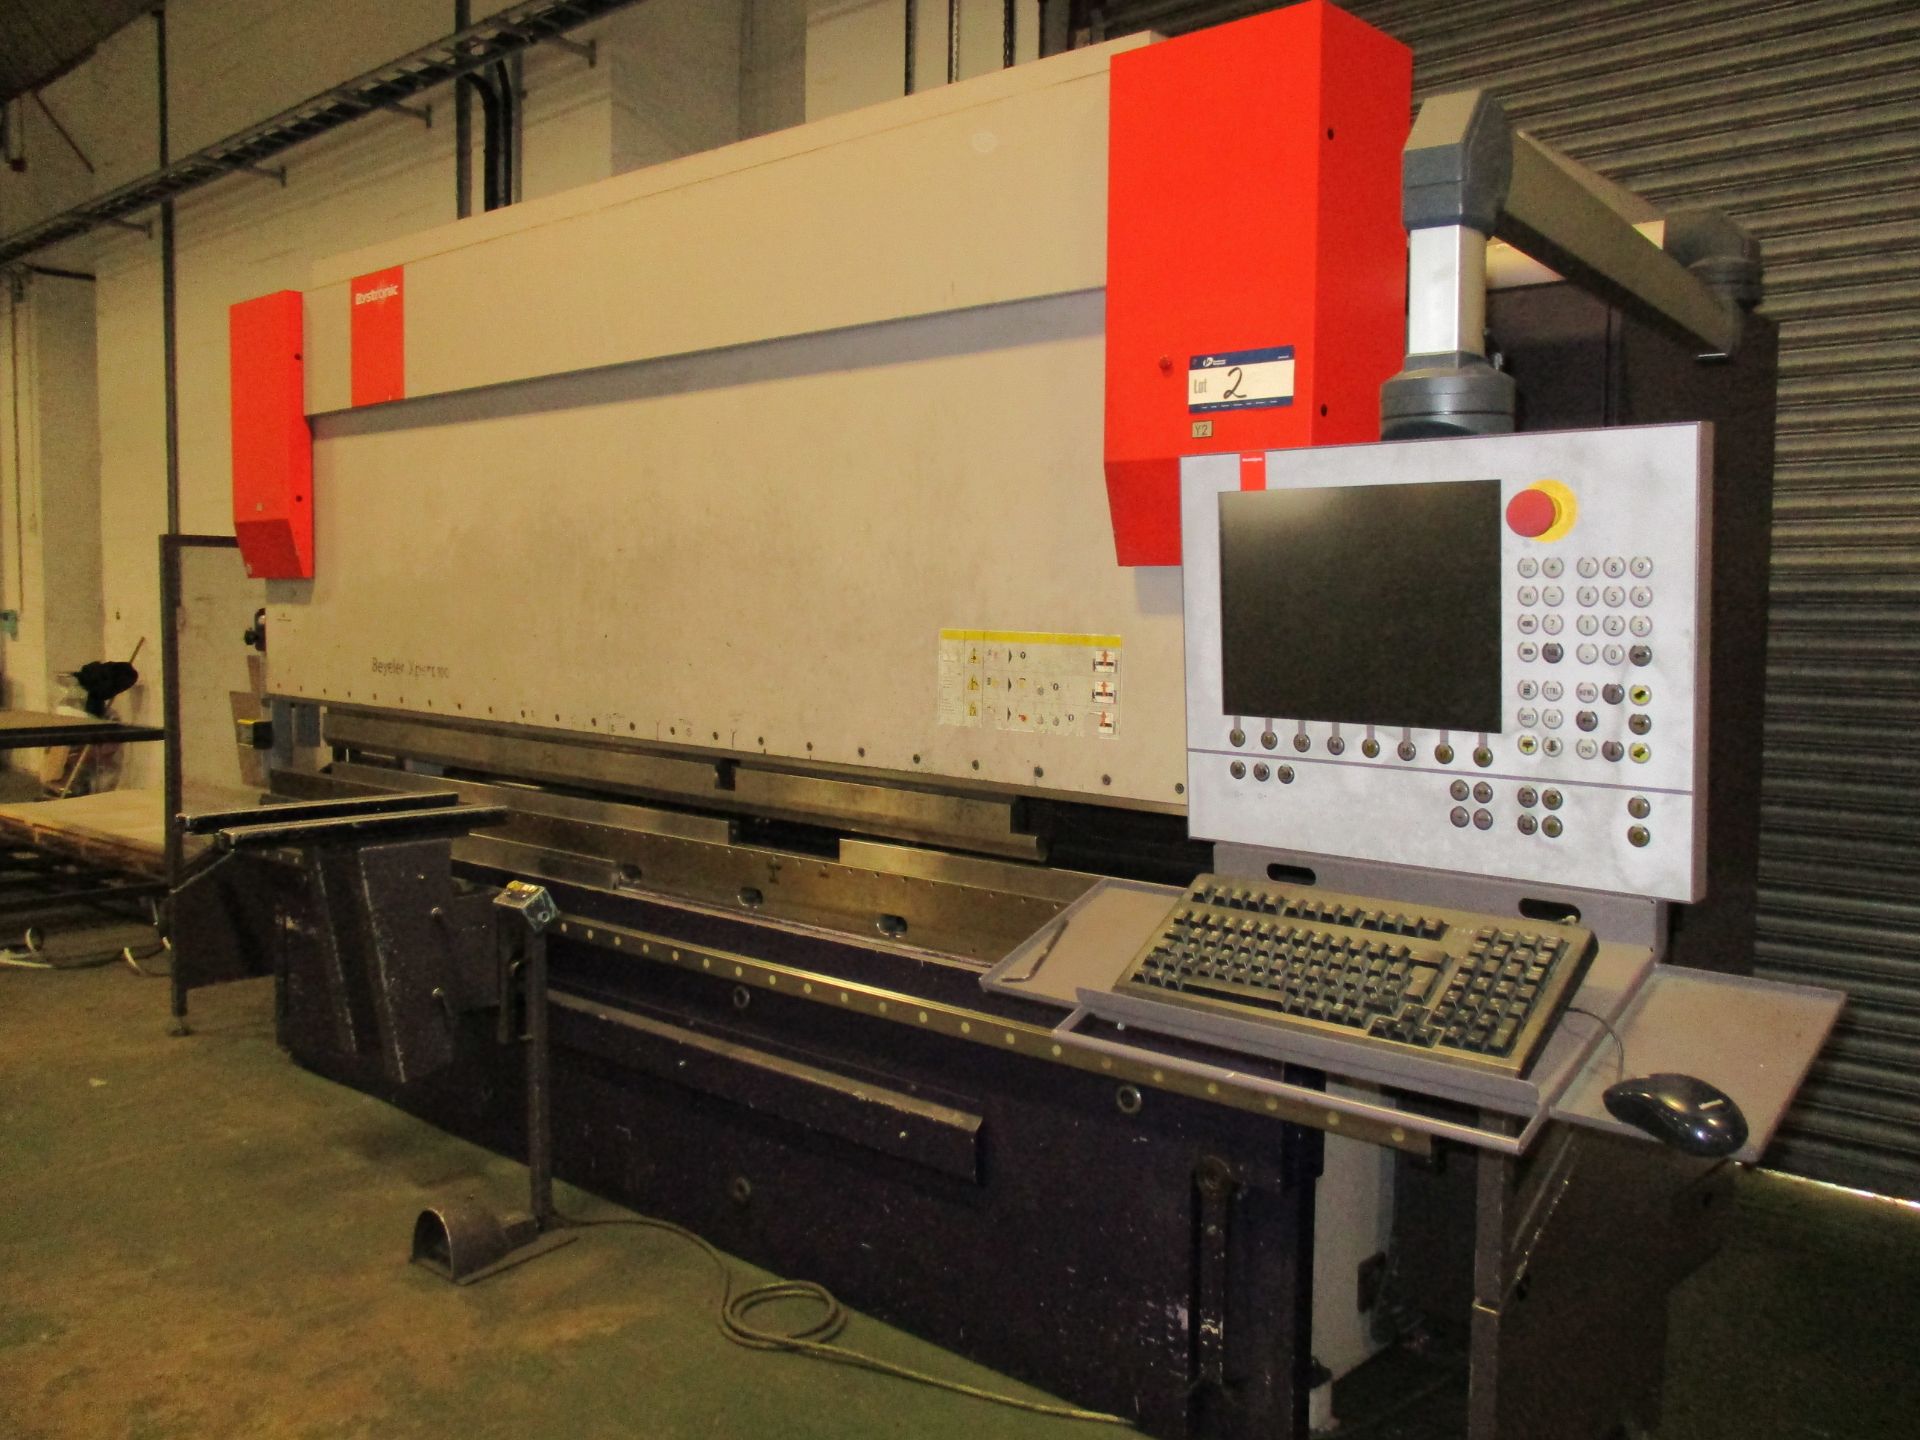 Bystronic Beyeler Xpert 100 x 4100 CNC Press Brake, serial no. 10520014, year of manufacture 2010, - Image 2 of 5